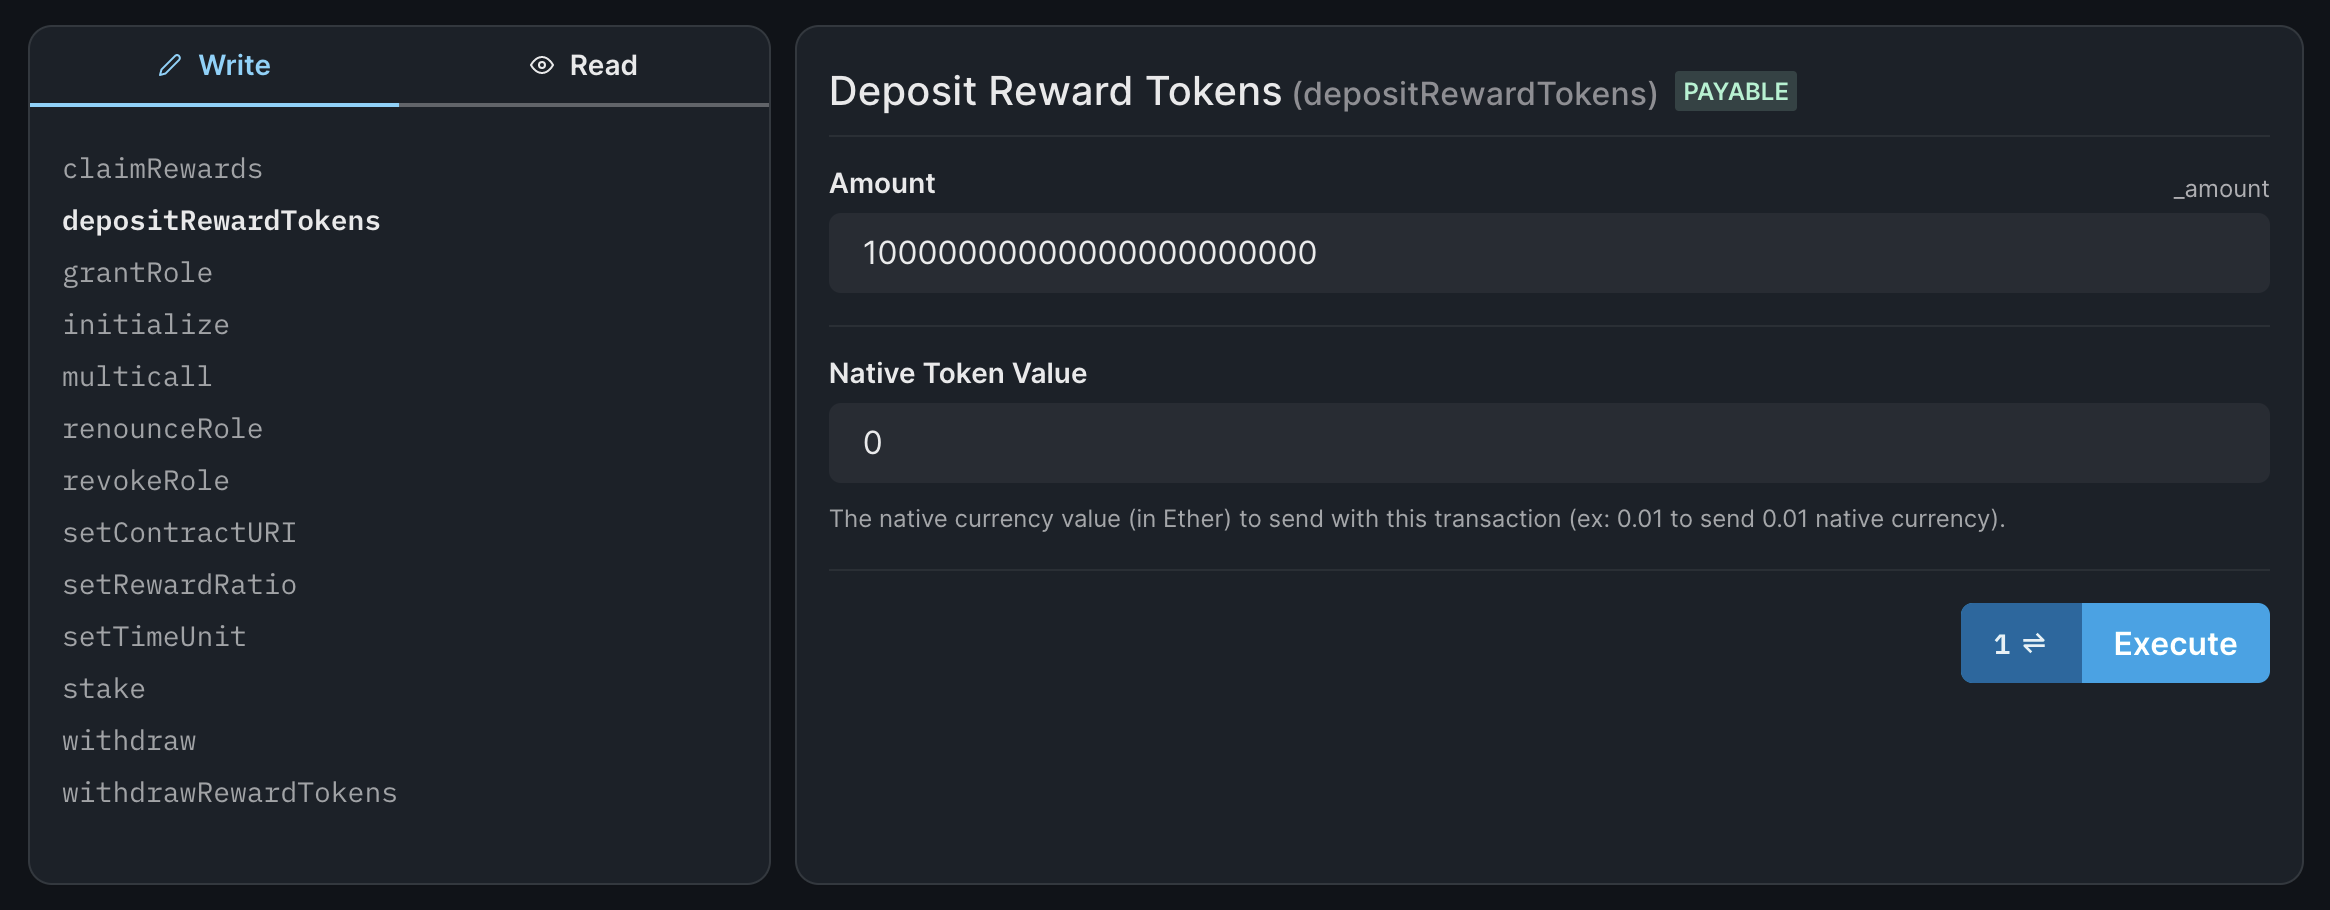 Depositing reward tokens to the staking contract